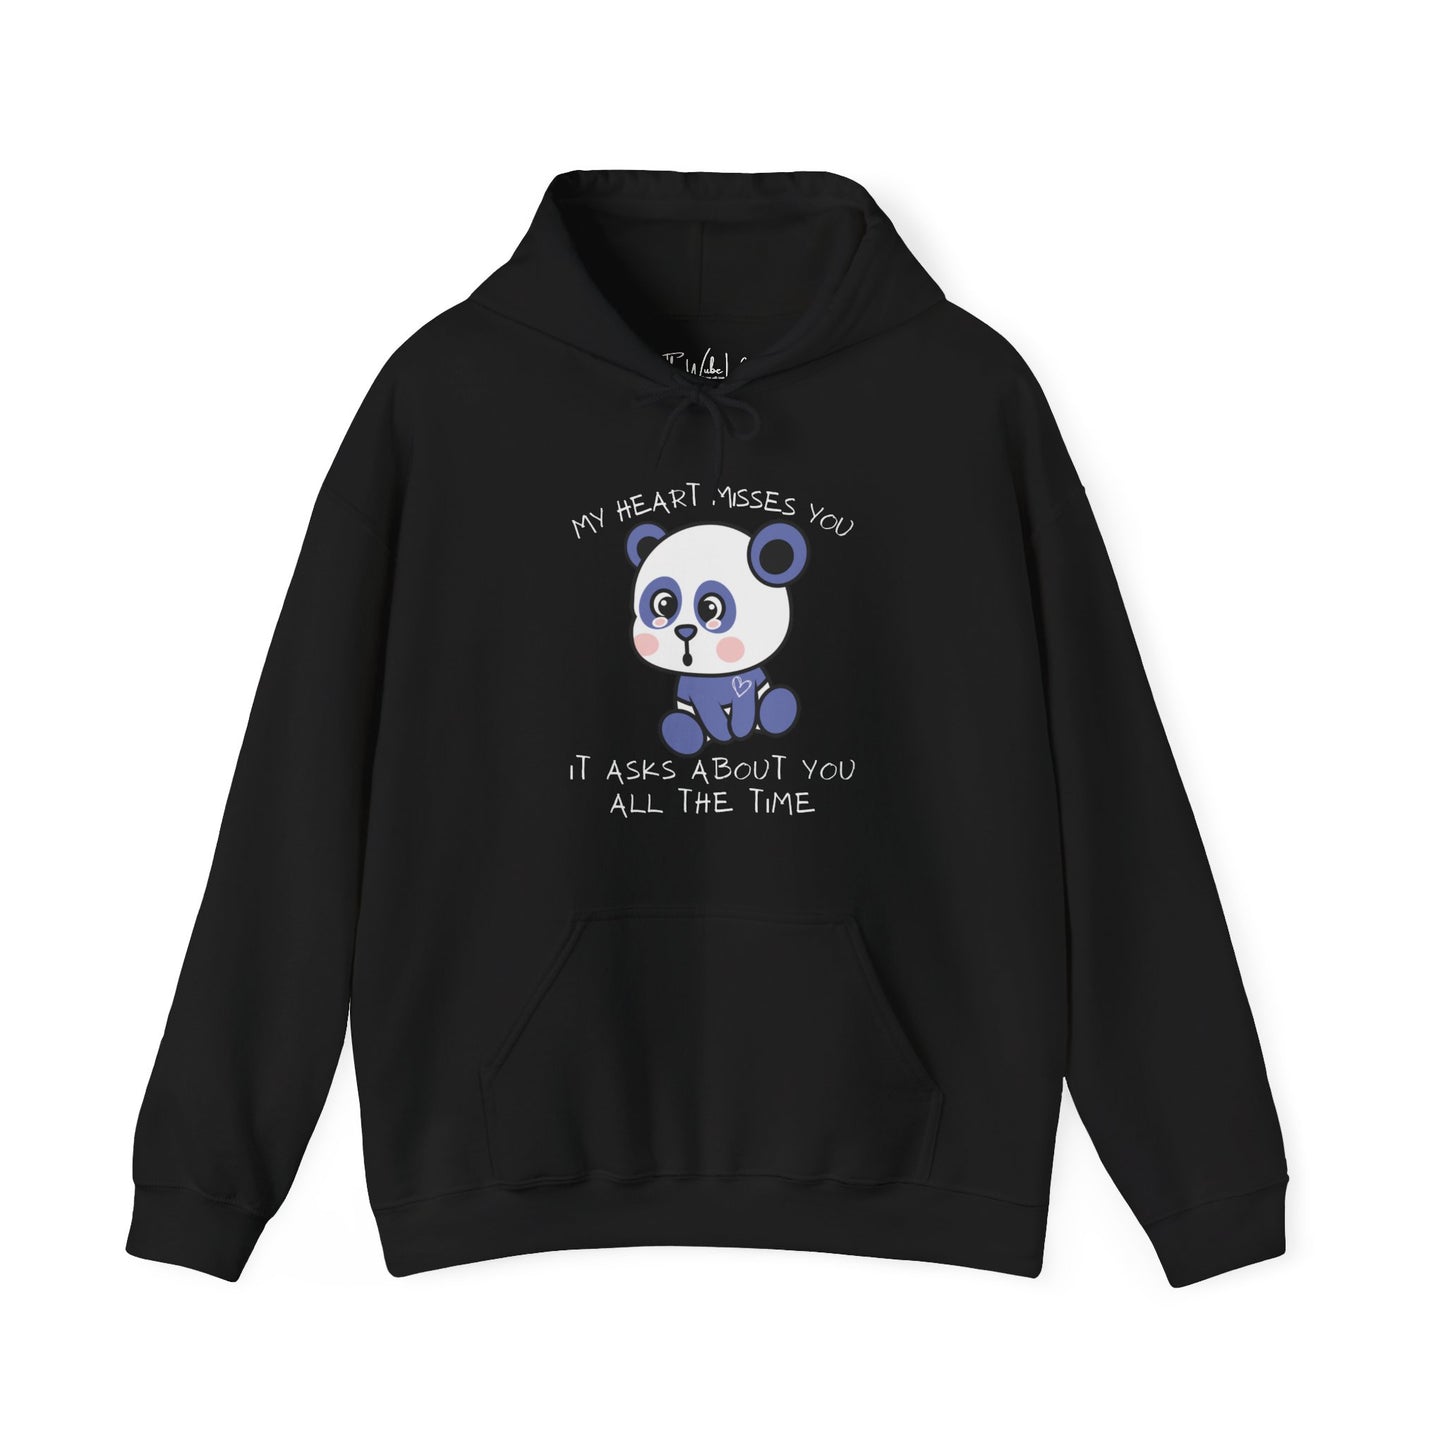 Black Gildan 18500 Hooded Sweatshirt - wrap yourself in the warmth of this emotional sweatshirt that symbolizes love, loss and the grief we face after losing a loved one.